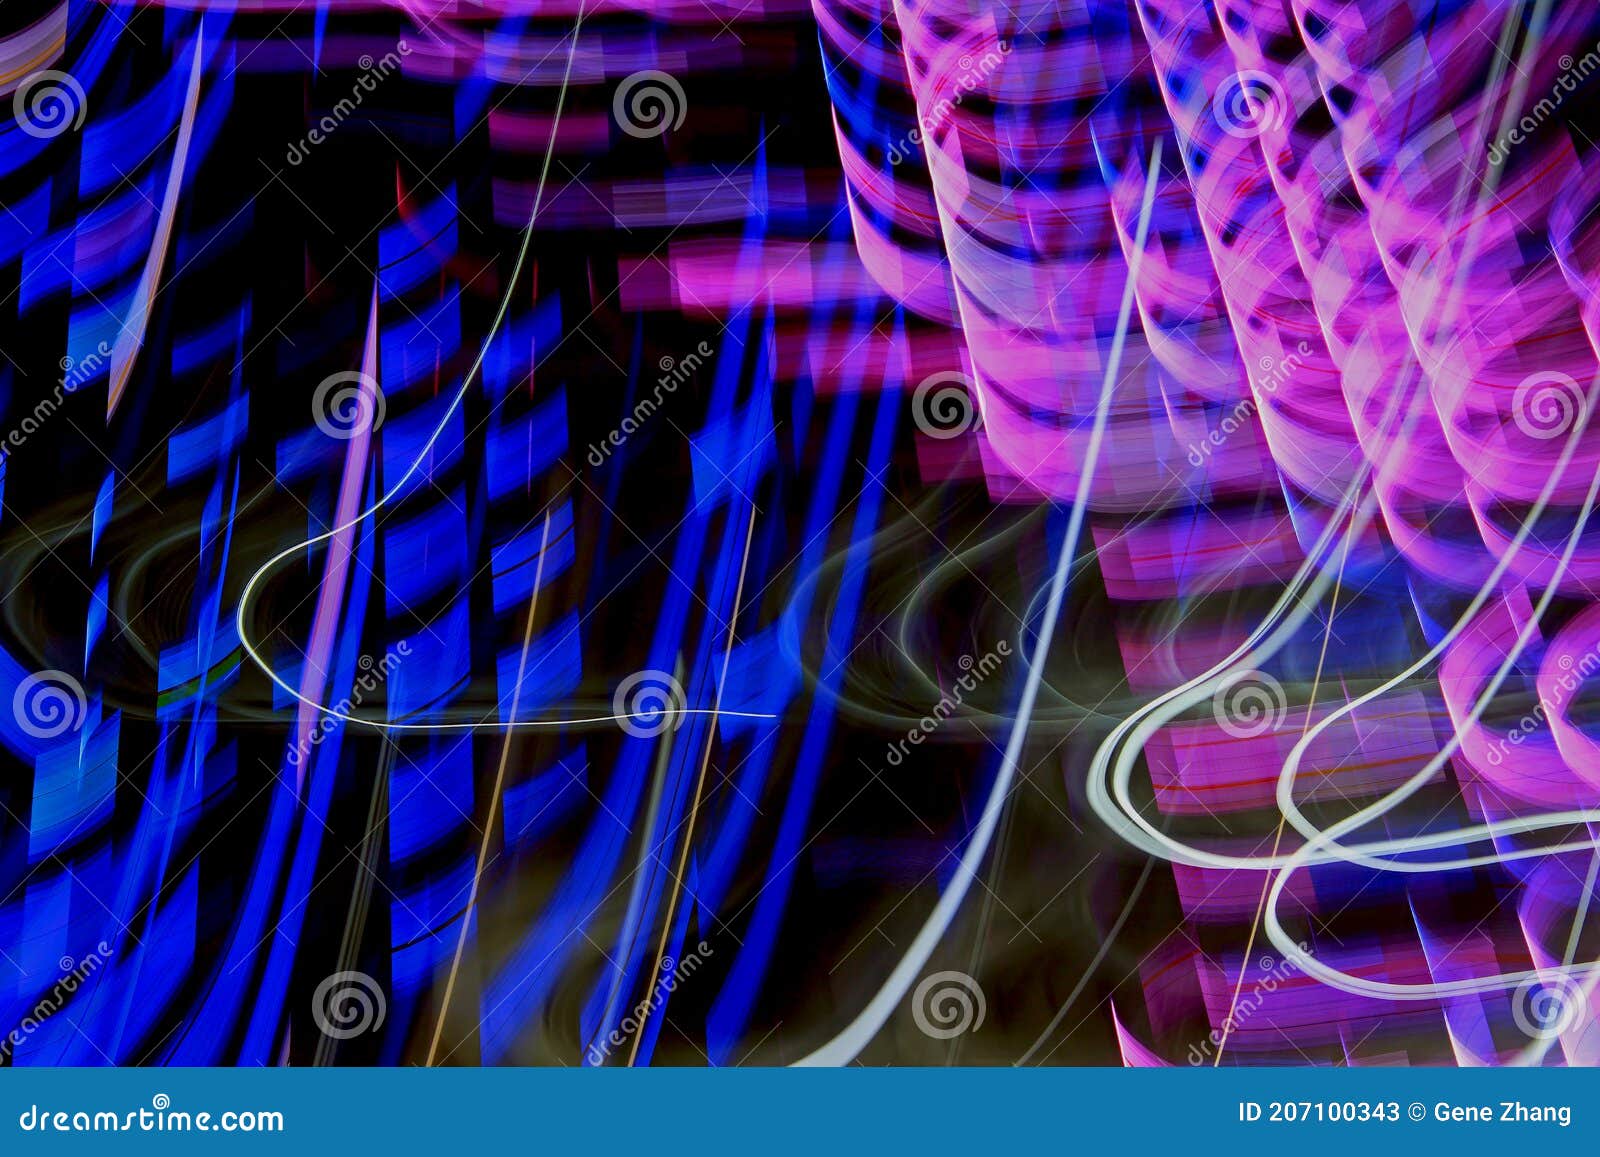 blurred lighting effect in blue and pink